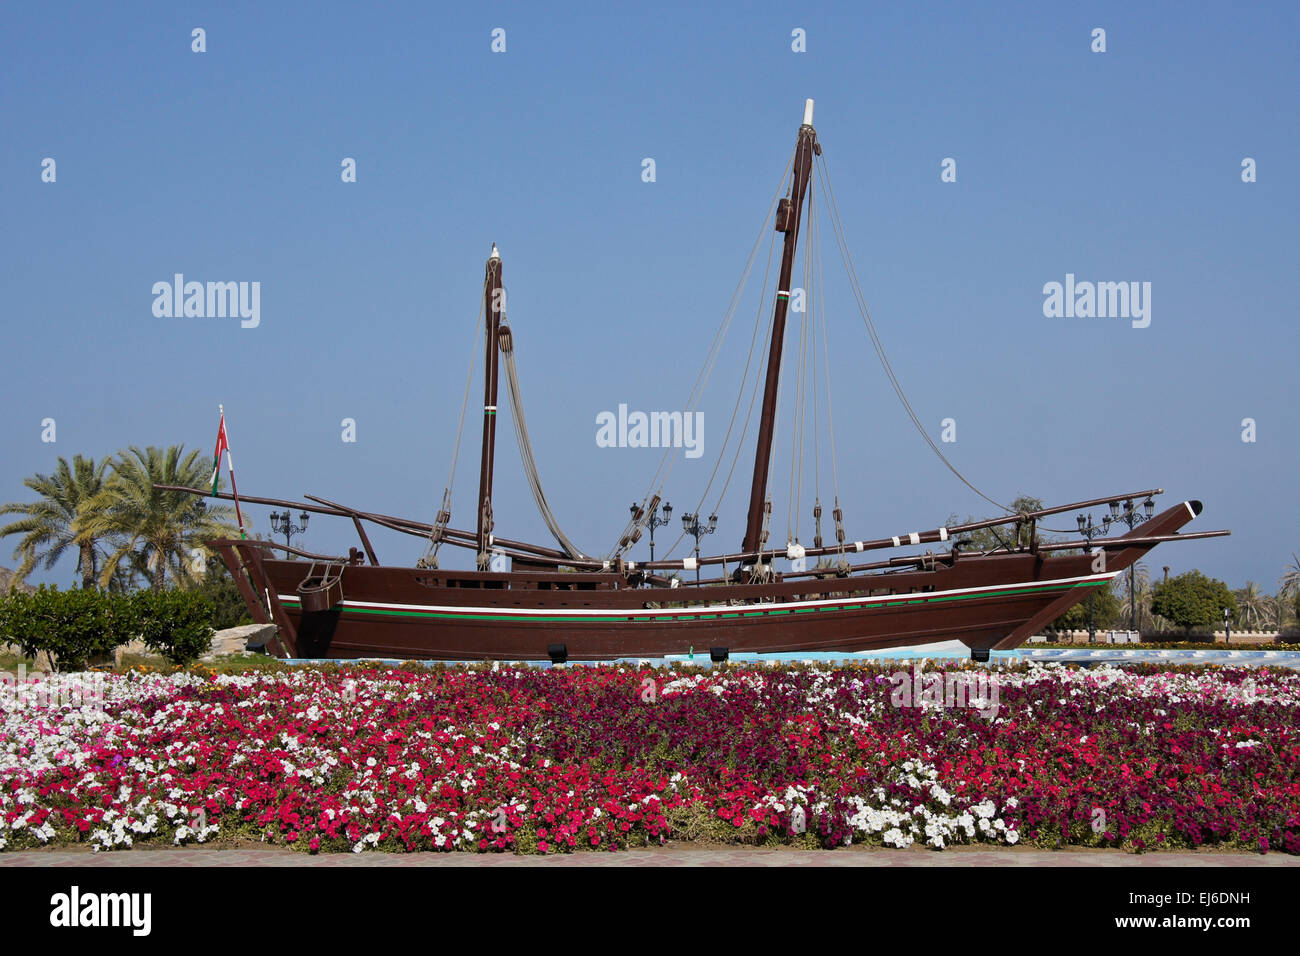 Replica of 'Sohar' wood boat in Al-Bustan Roundabout, Muscat, Sultanate of Oman Stock Photo